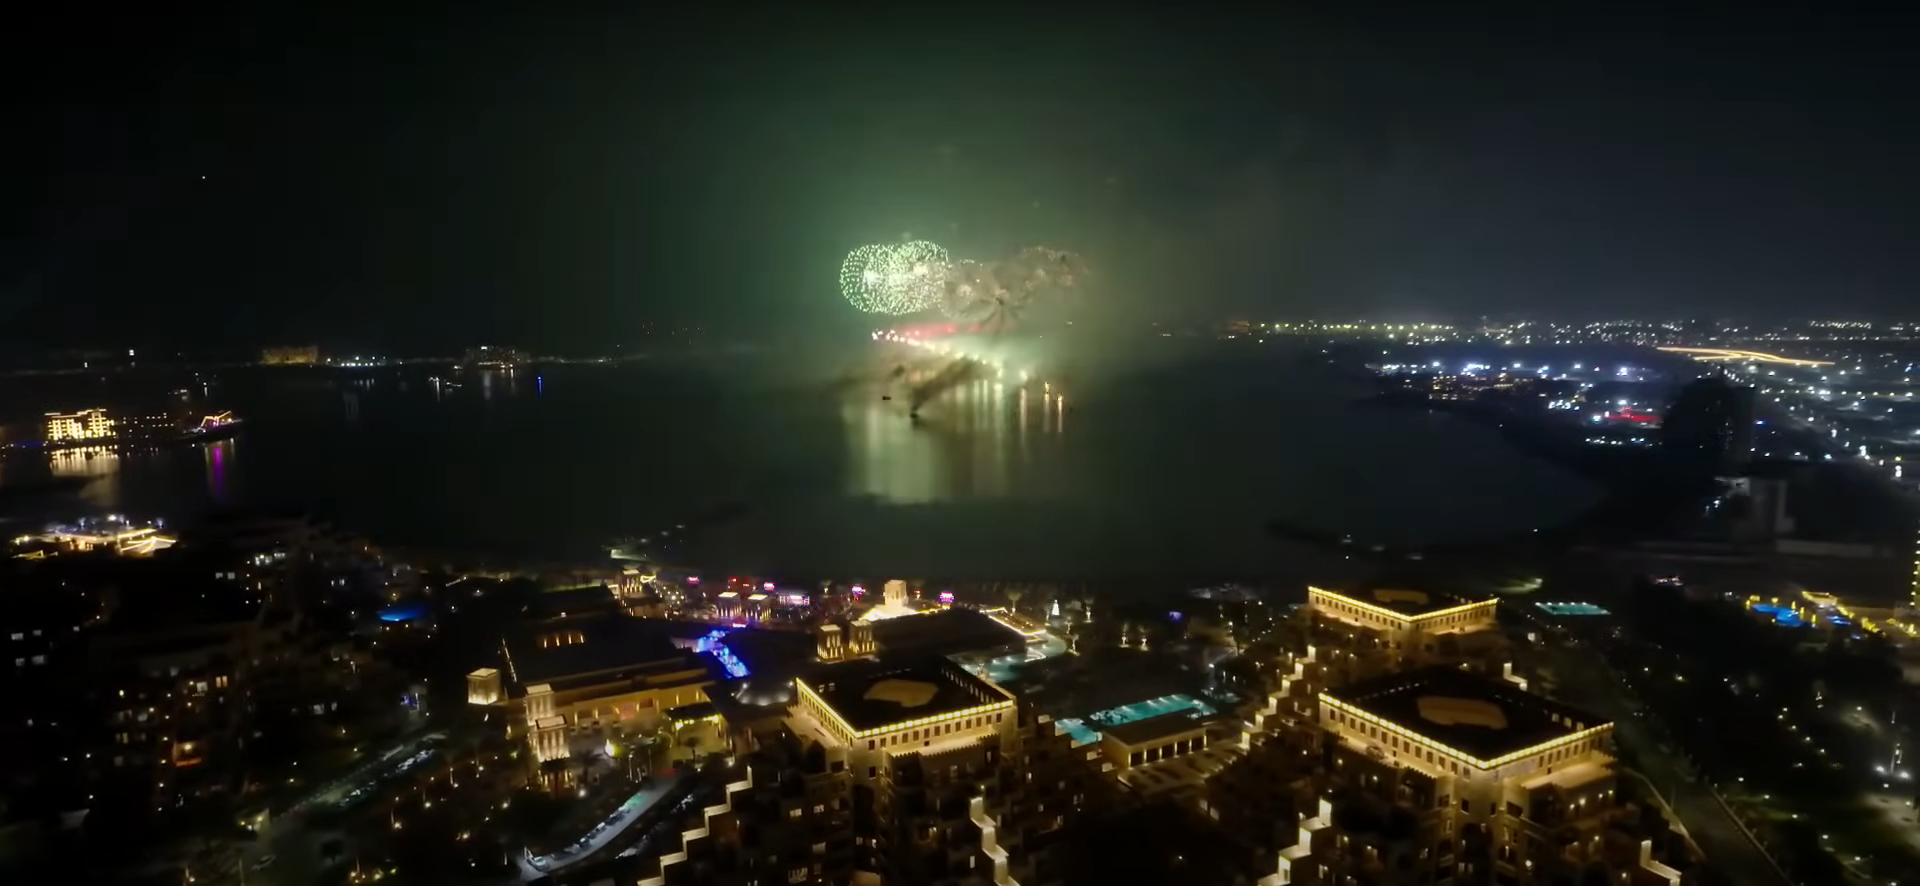 New Year's fireworks in the UAE broke two Guinness records: more than 1,000 drones were used in the spectacular show. Photos and video